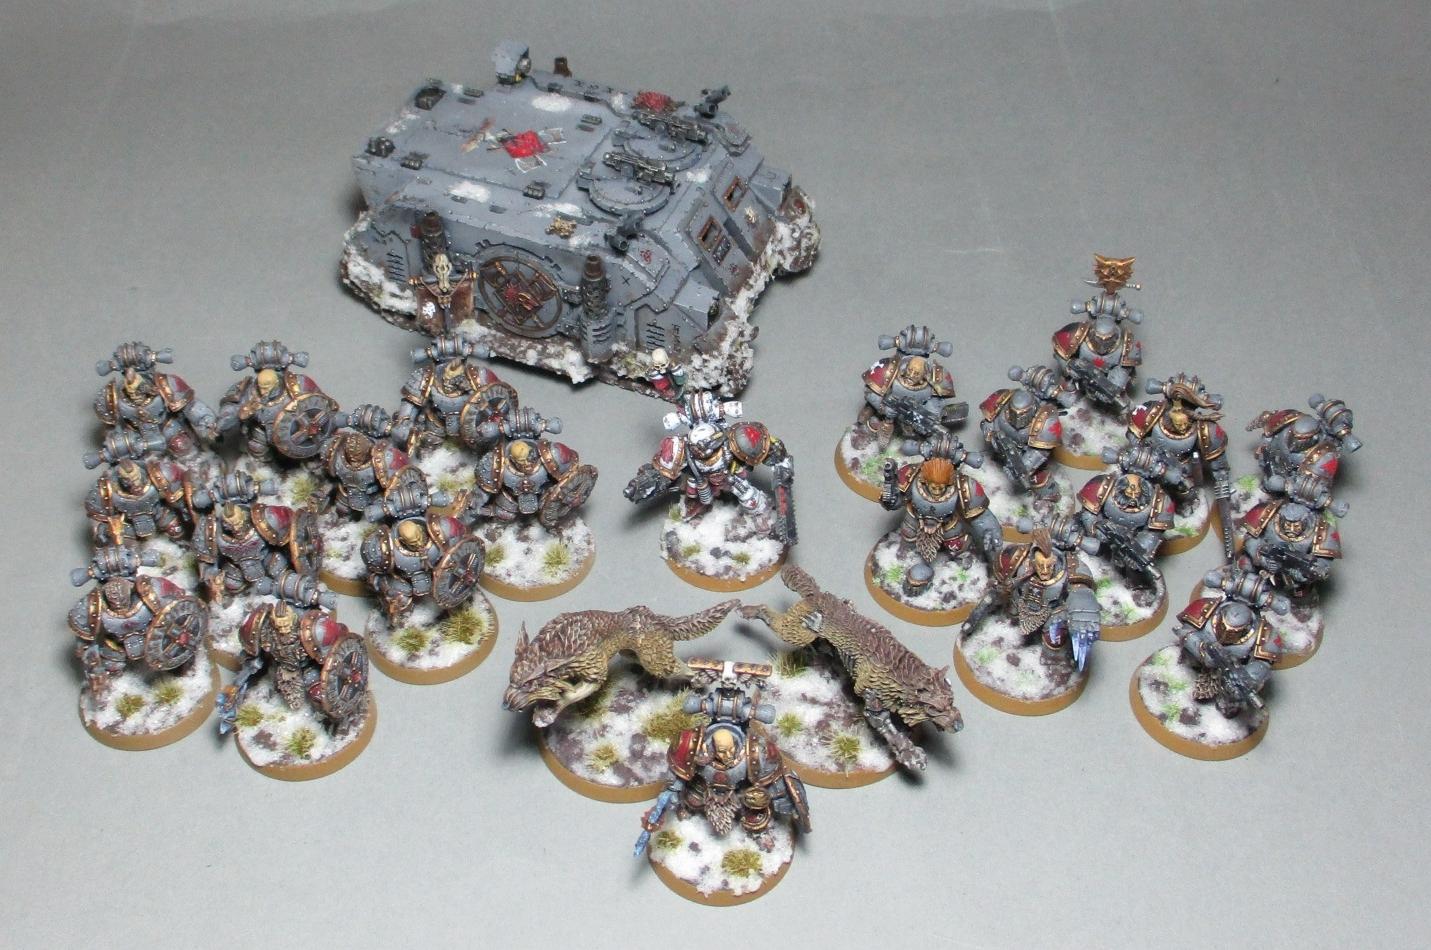 wh30k_space_wolves_army_20082020_02.jpg